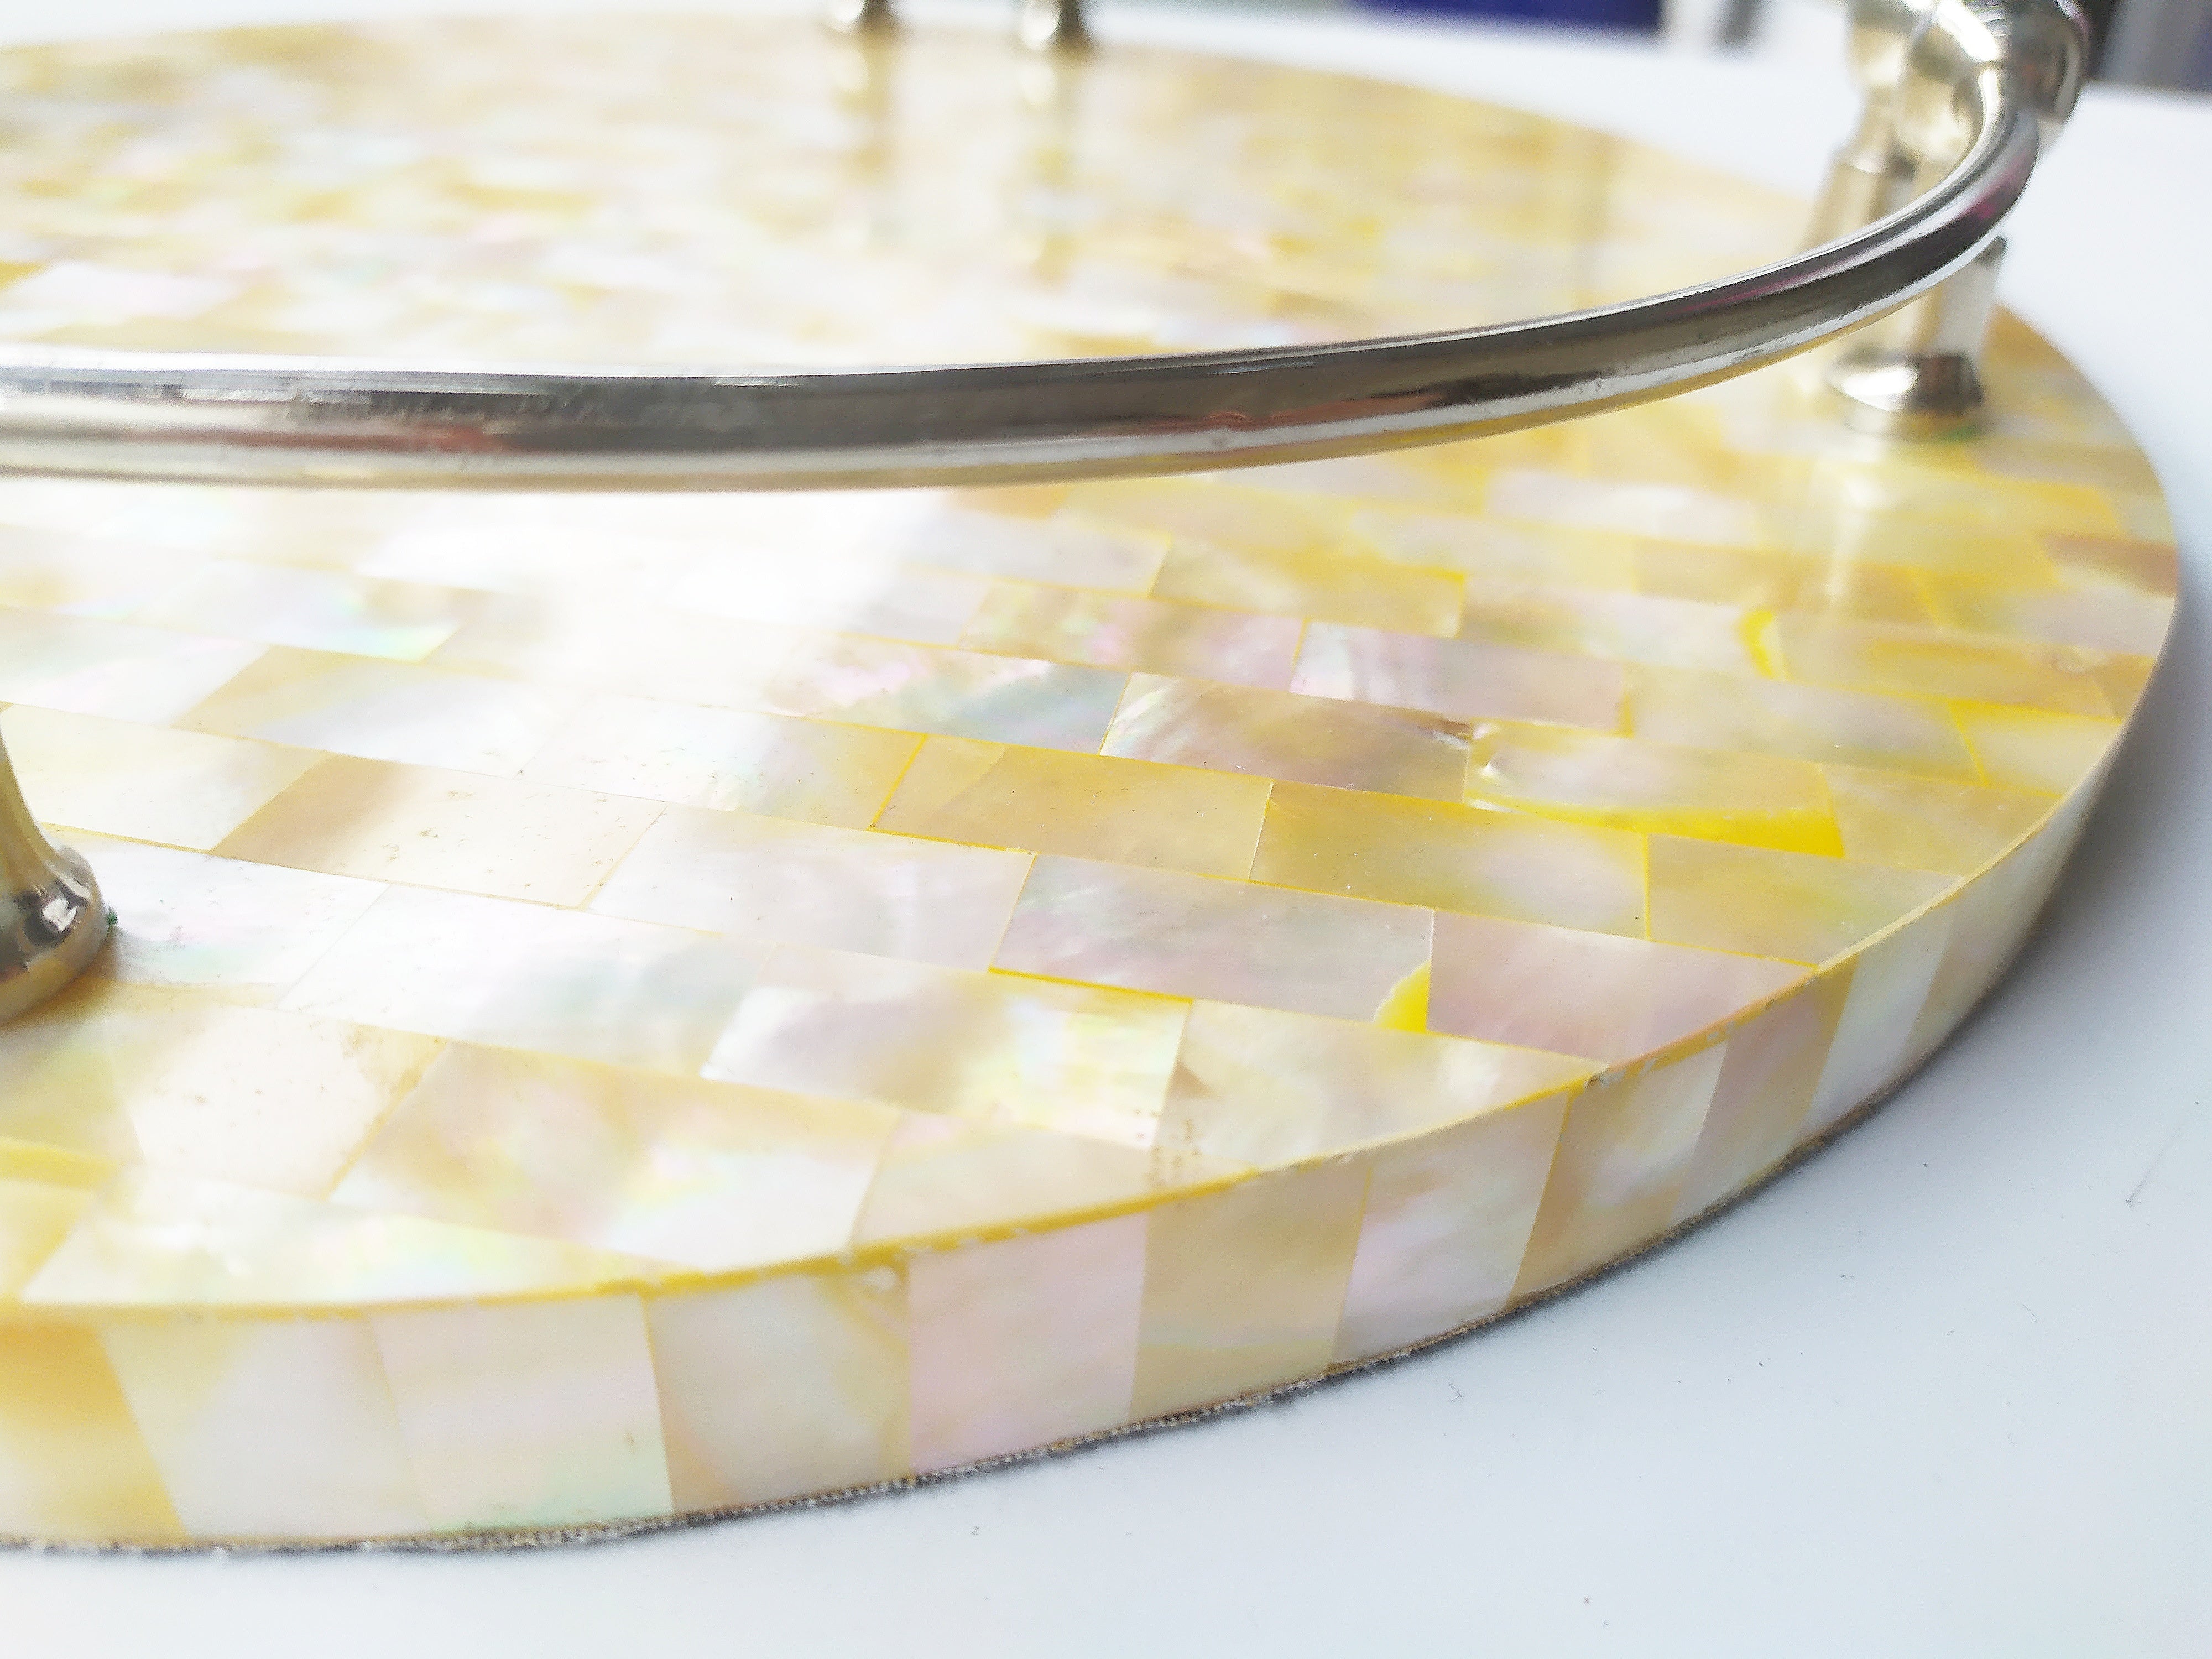 Mother of Pearl Round Decorative Tray - Pearl Yellow Tray with Brass Handles